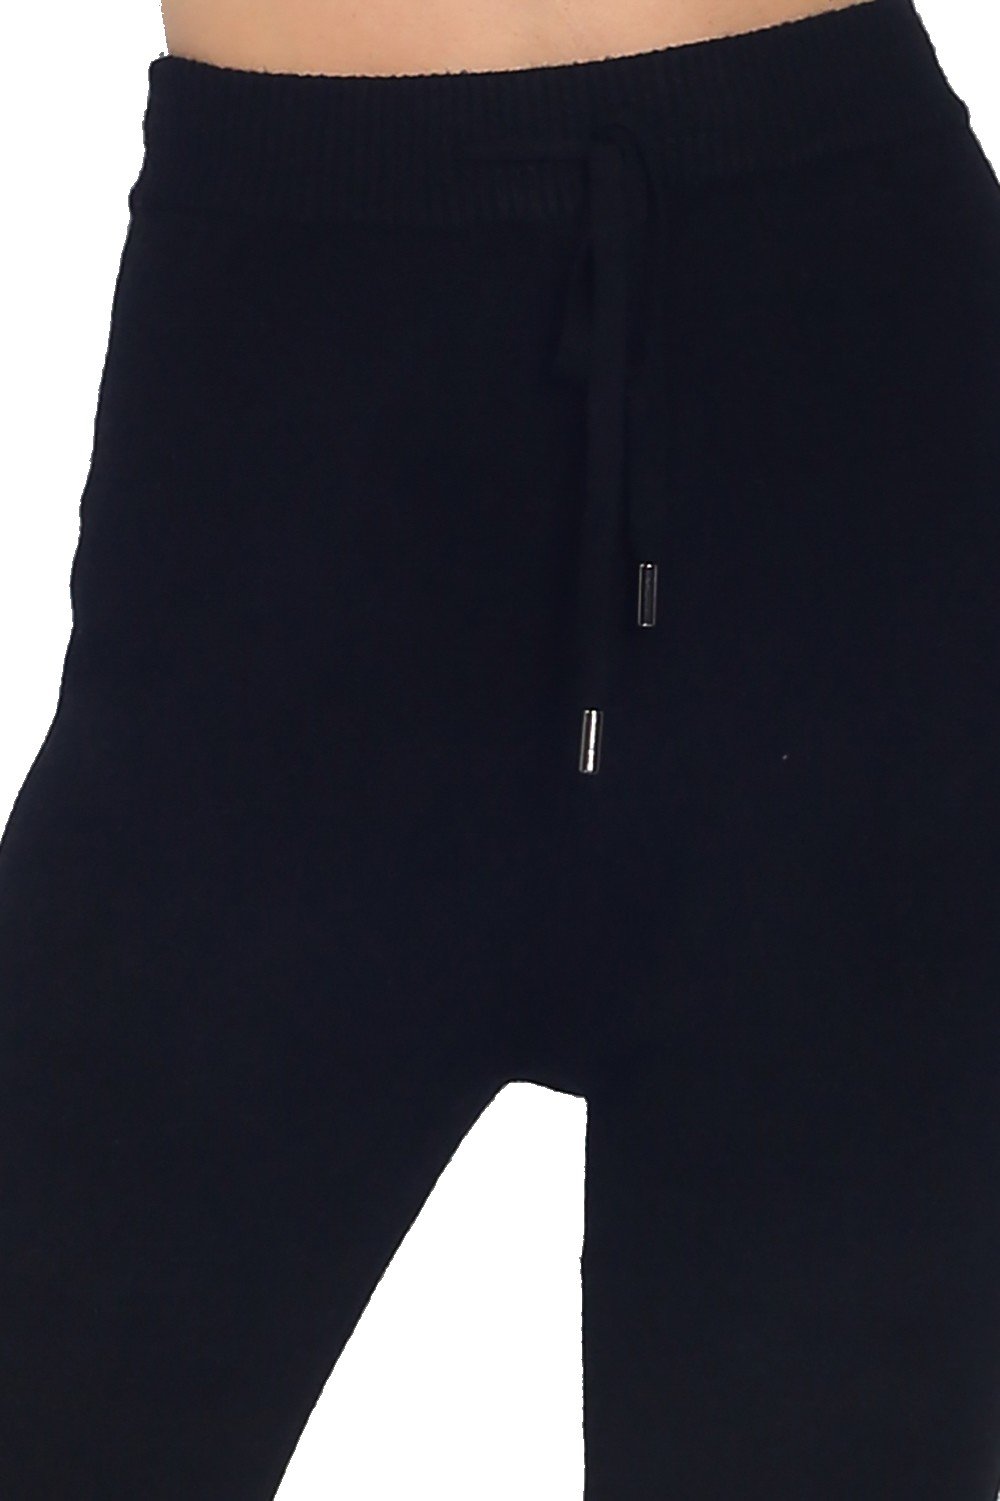 SWEATPANT WITH DRAWSTRING AT THE WAIST